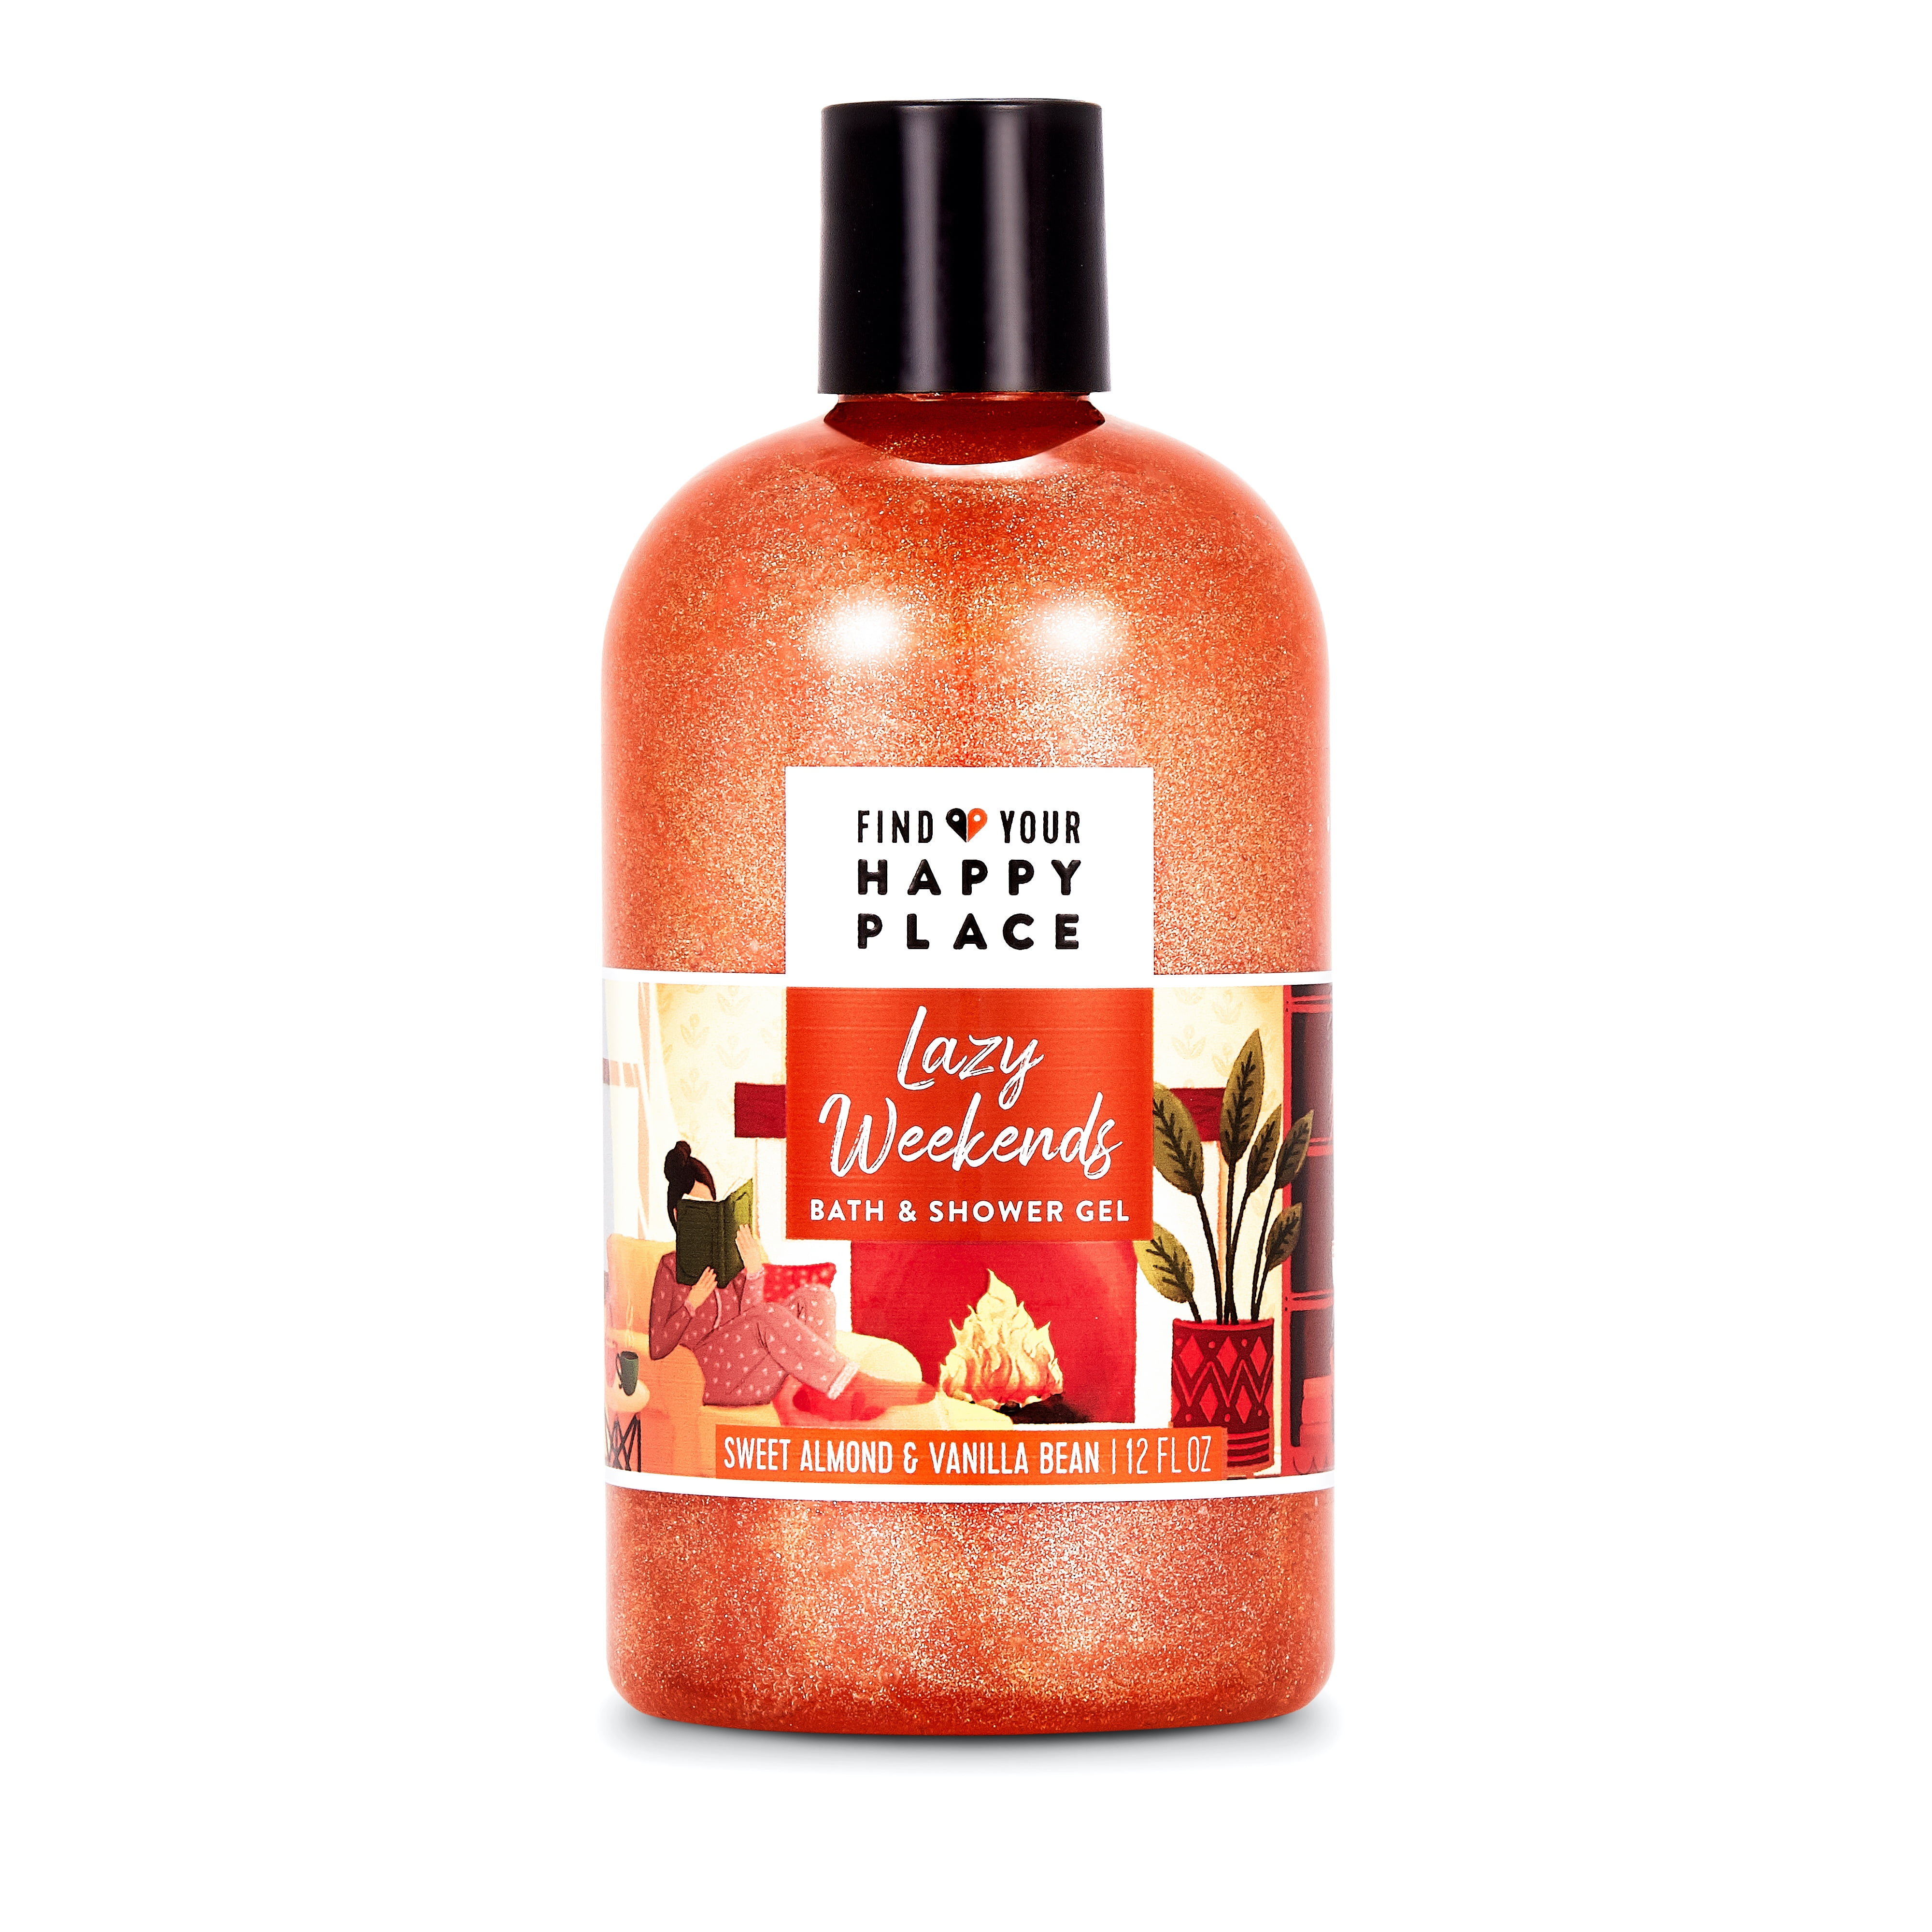 knoop Uitvoerder mode Find Your Happy Place Indulgent Bubble Bath And Shower Gel, Lazy Weekends  Sweet Almond And Vanilla Bean 12 fl oz - Walmart.com